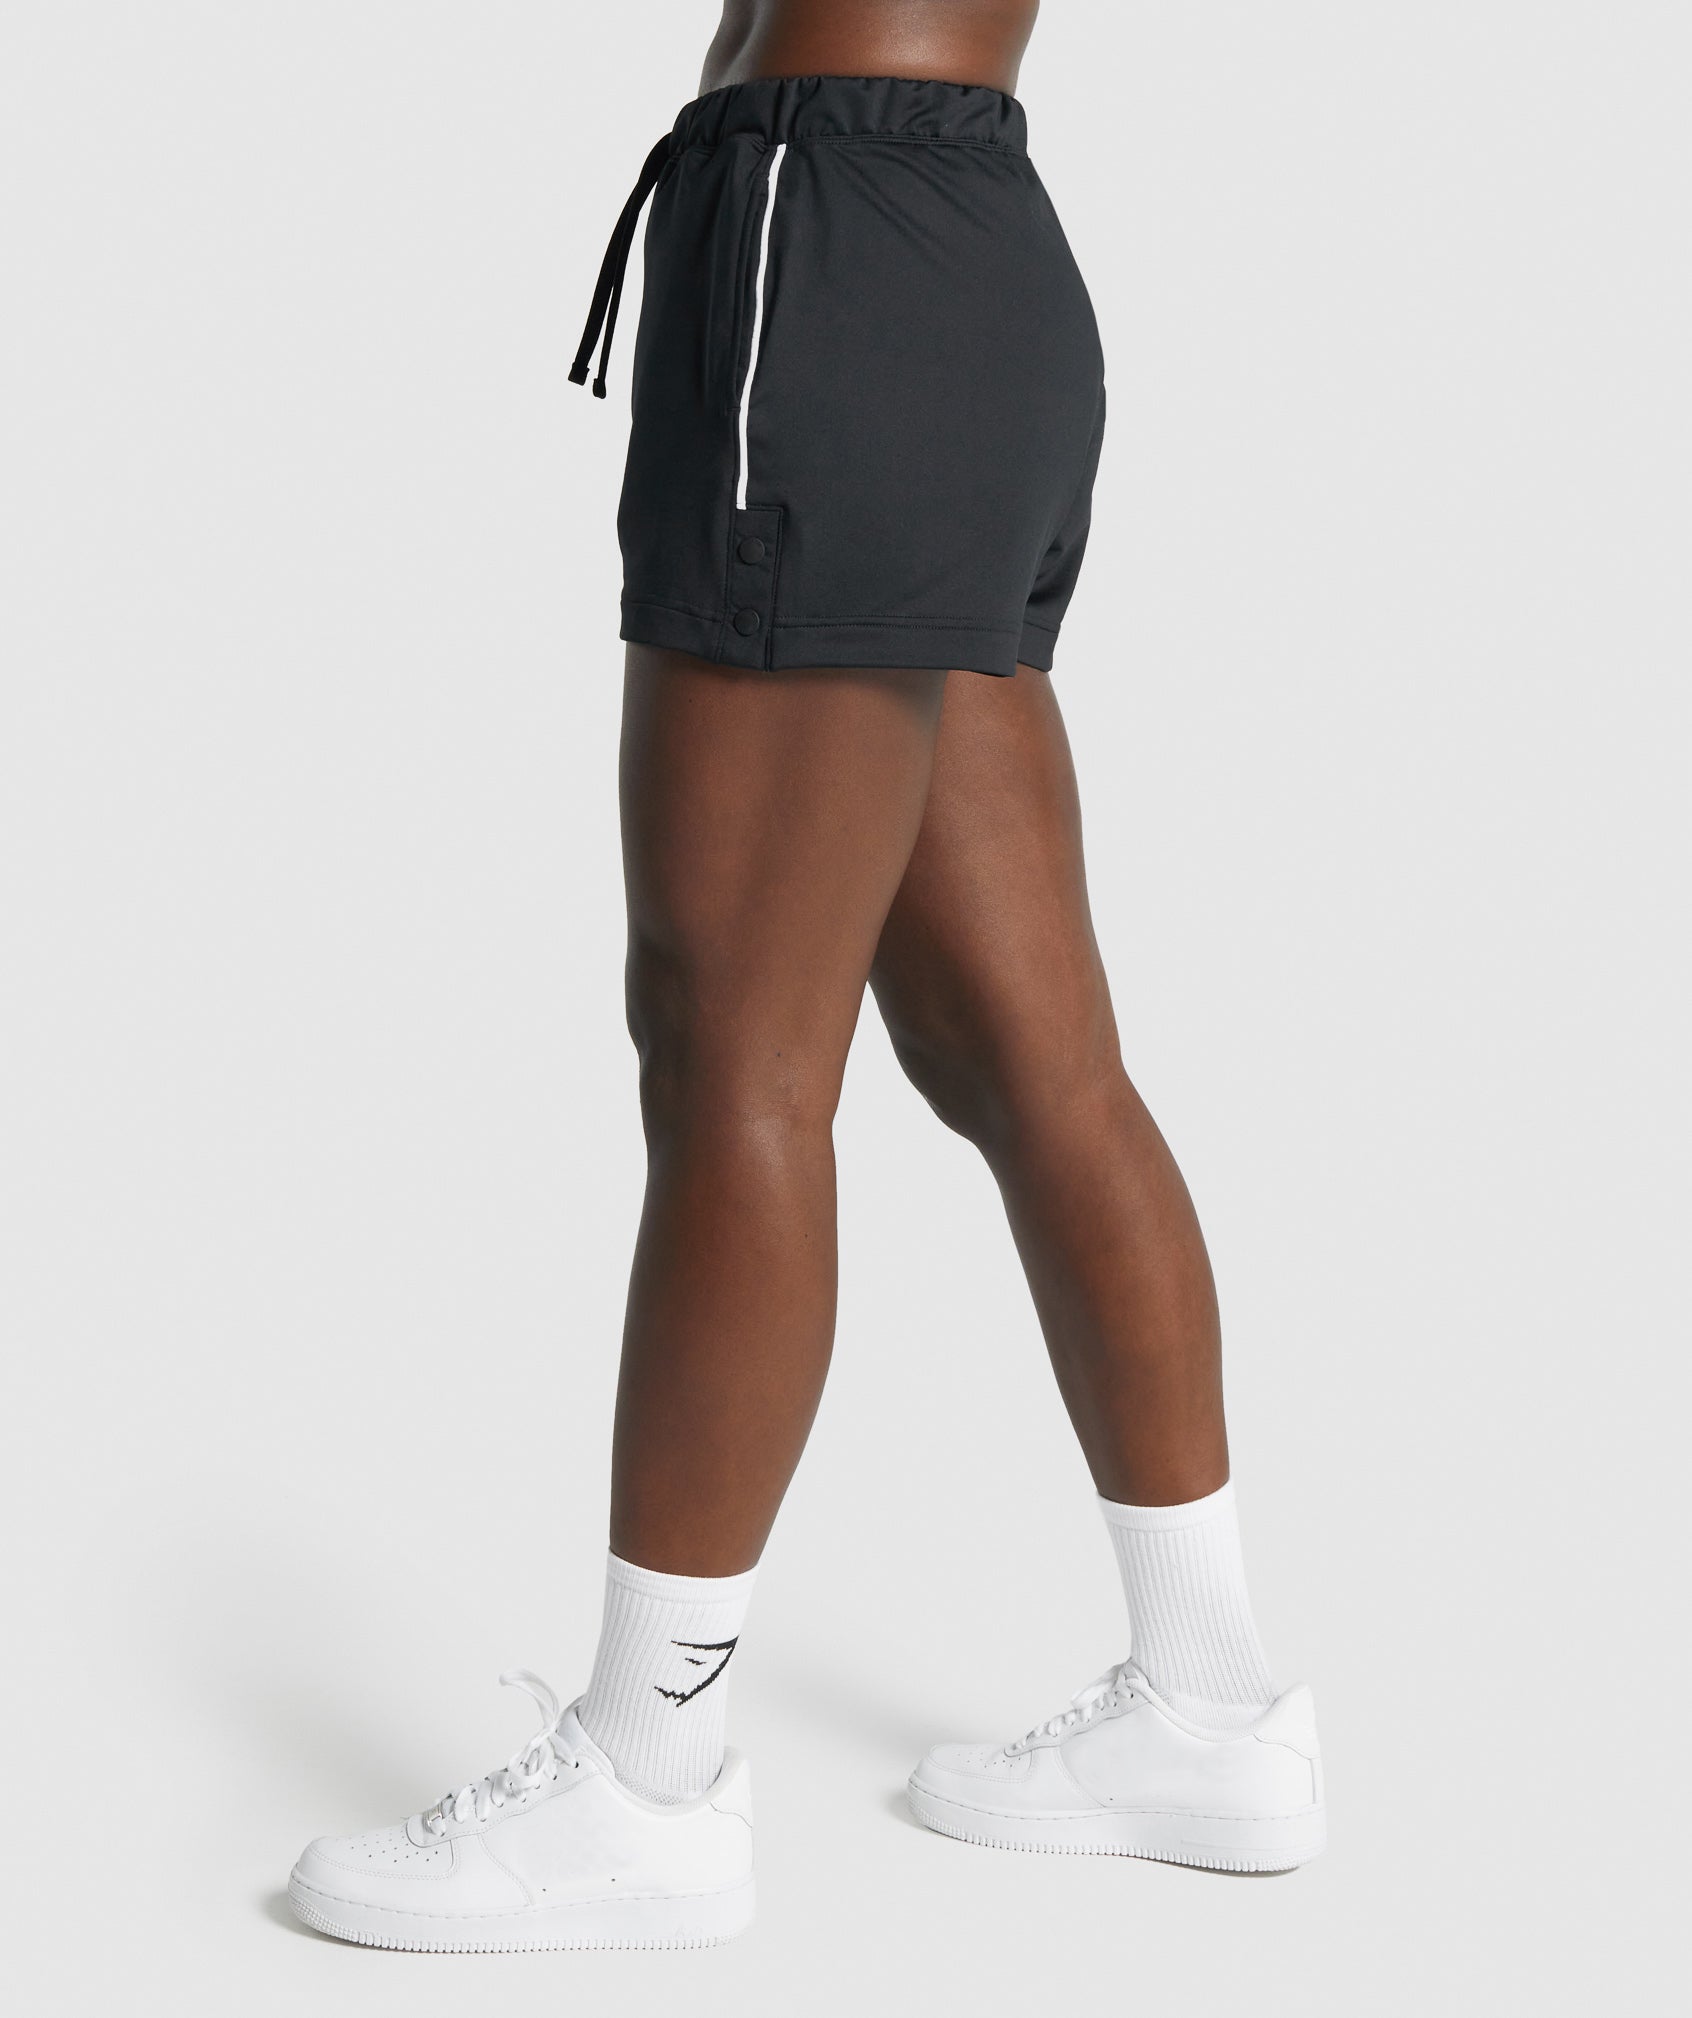 Recess Shorts in Black - view 4